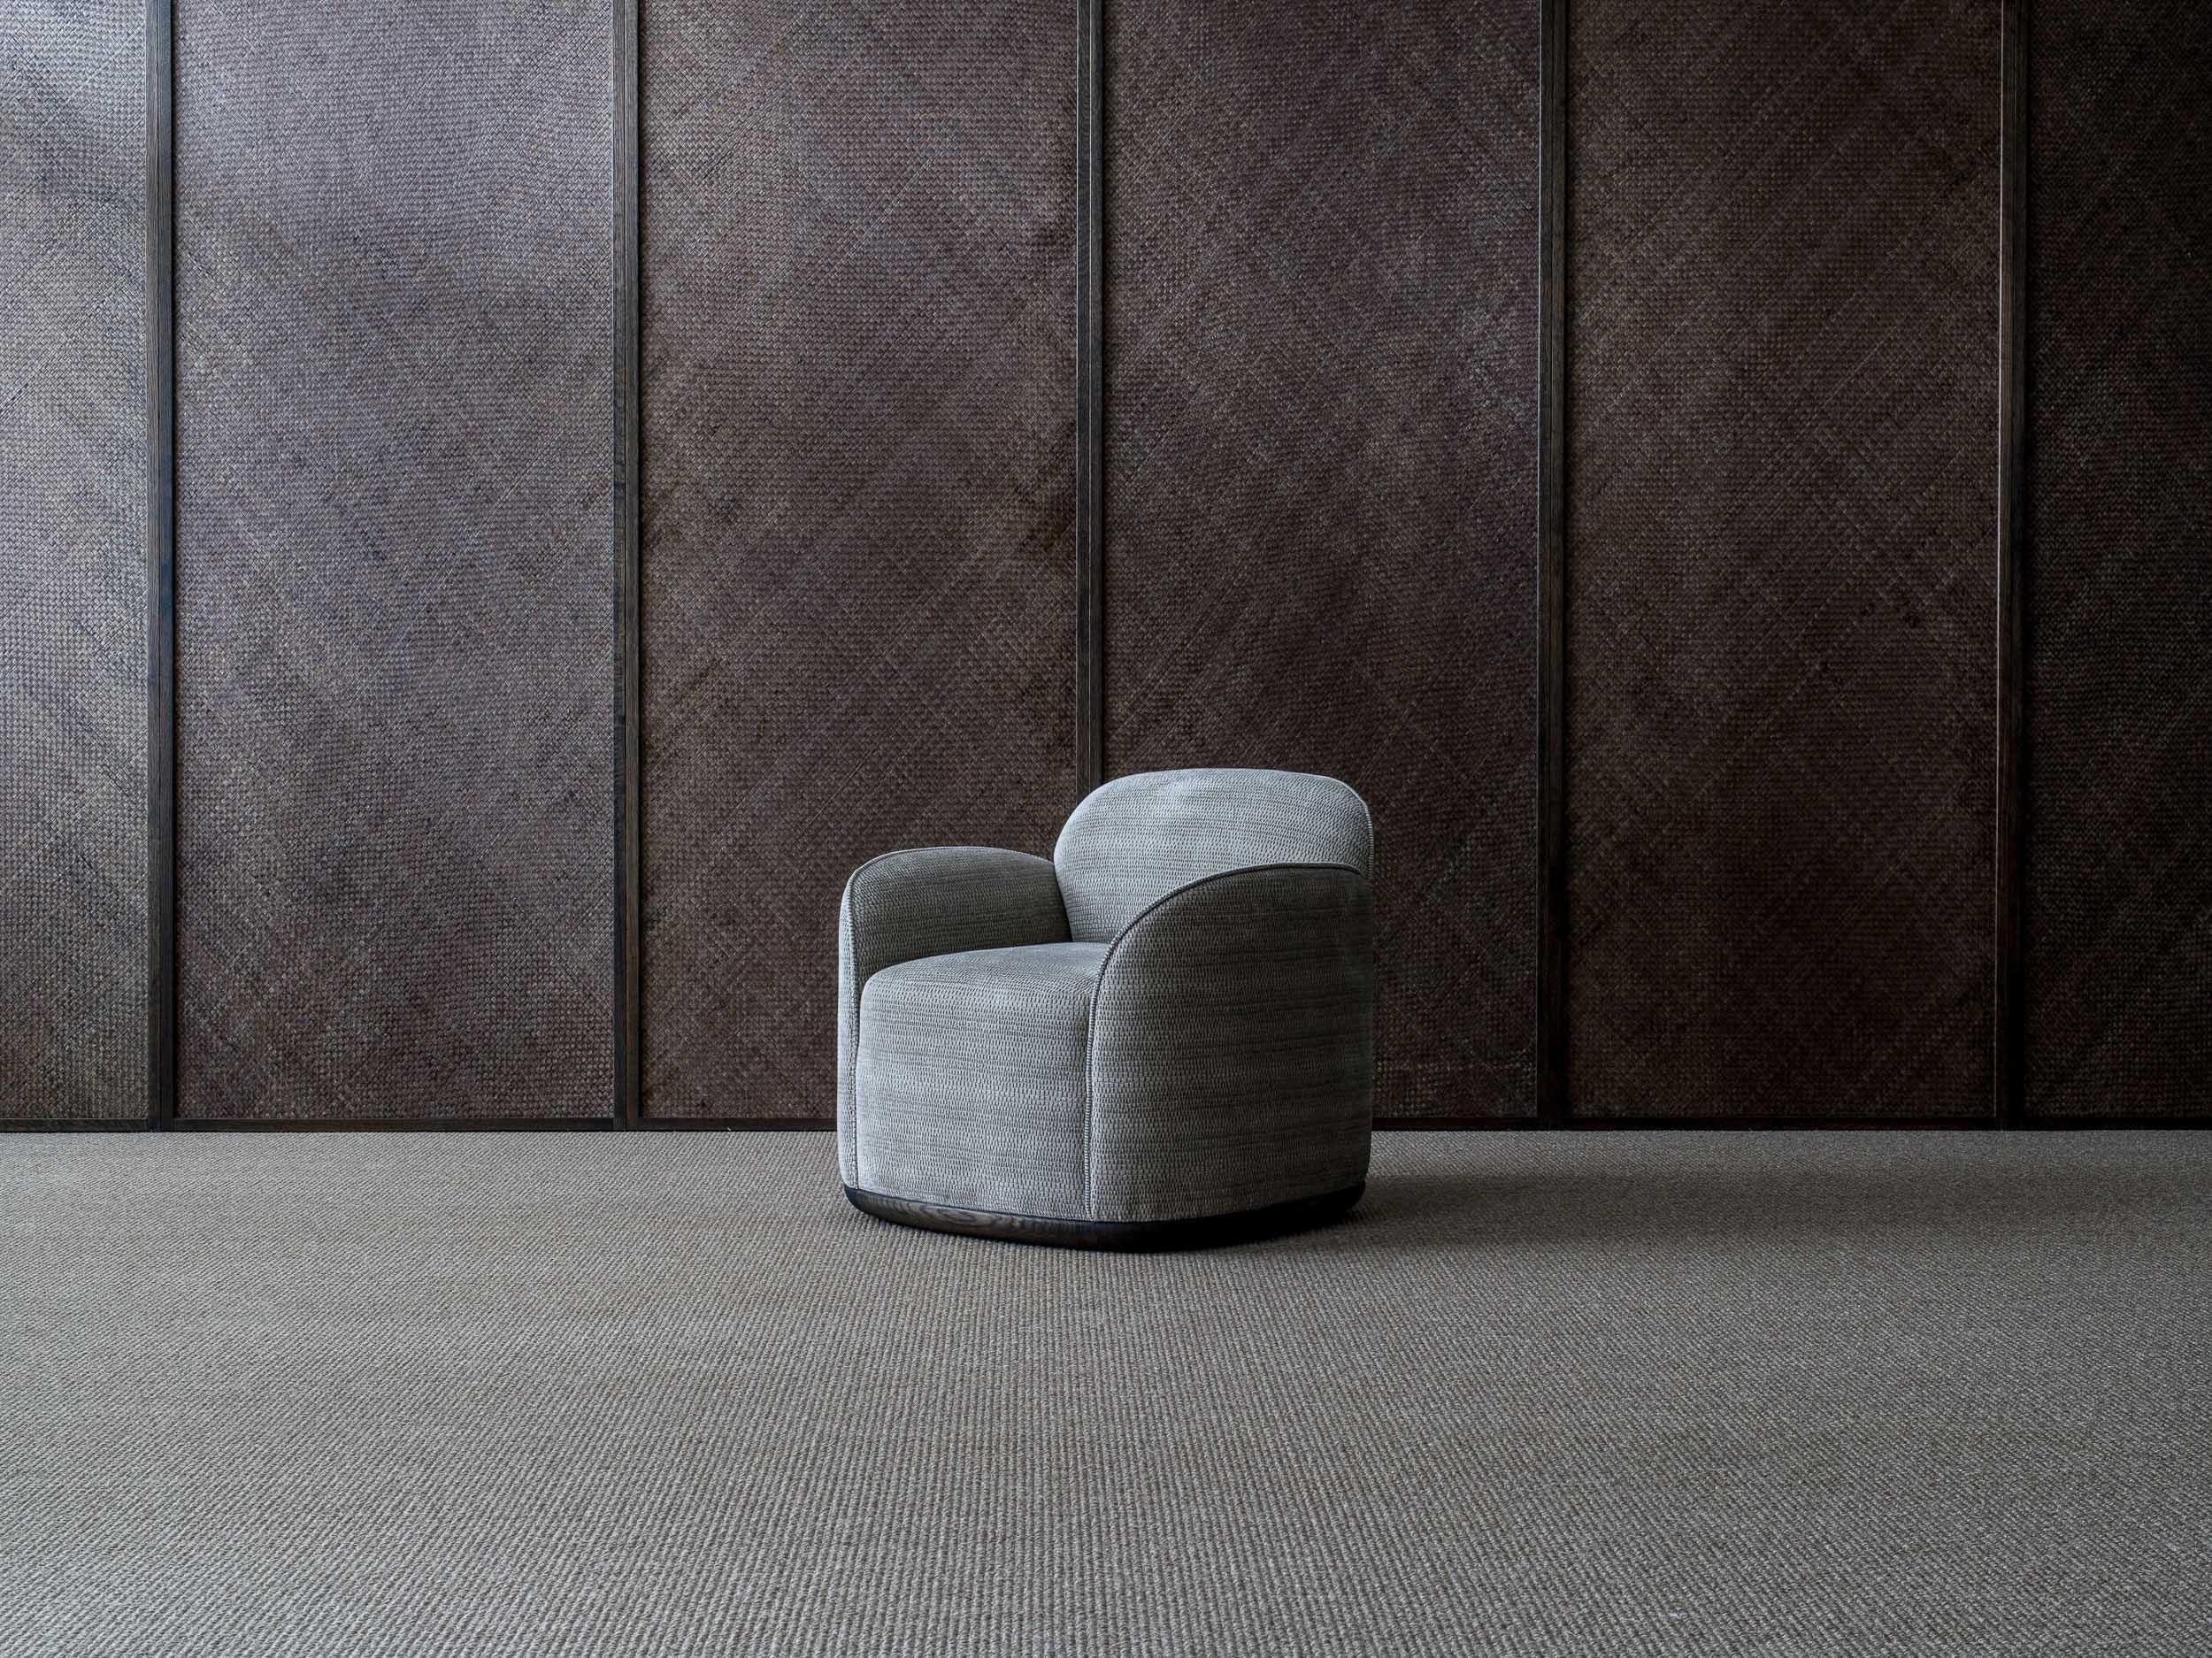 Unio Armchair by Poiat 
Designers: Timo Mikkonen & Antti Rouhunkoski 

Collection UNIO 2021

Dimensions: H. 72 x W. 75 D. 72 SH. 40
Model shown: Cat 1. Chivasso Yang 95
 
The Unio Collection, featuring an armchair and sofas, opens a new